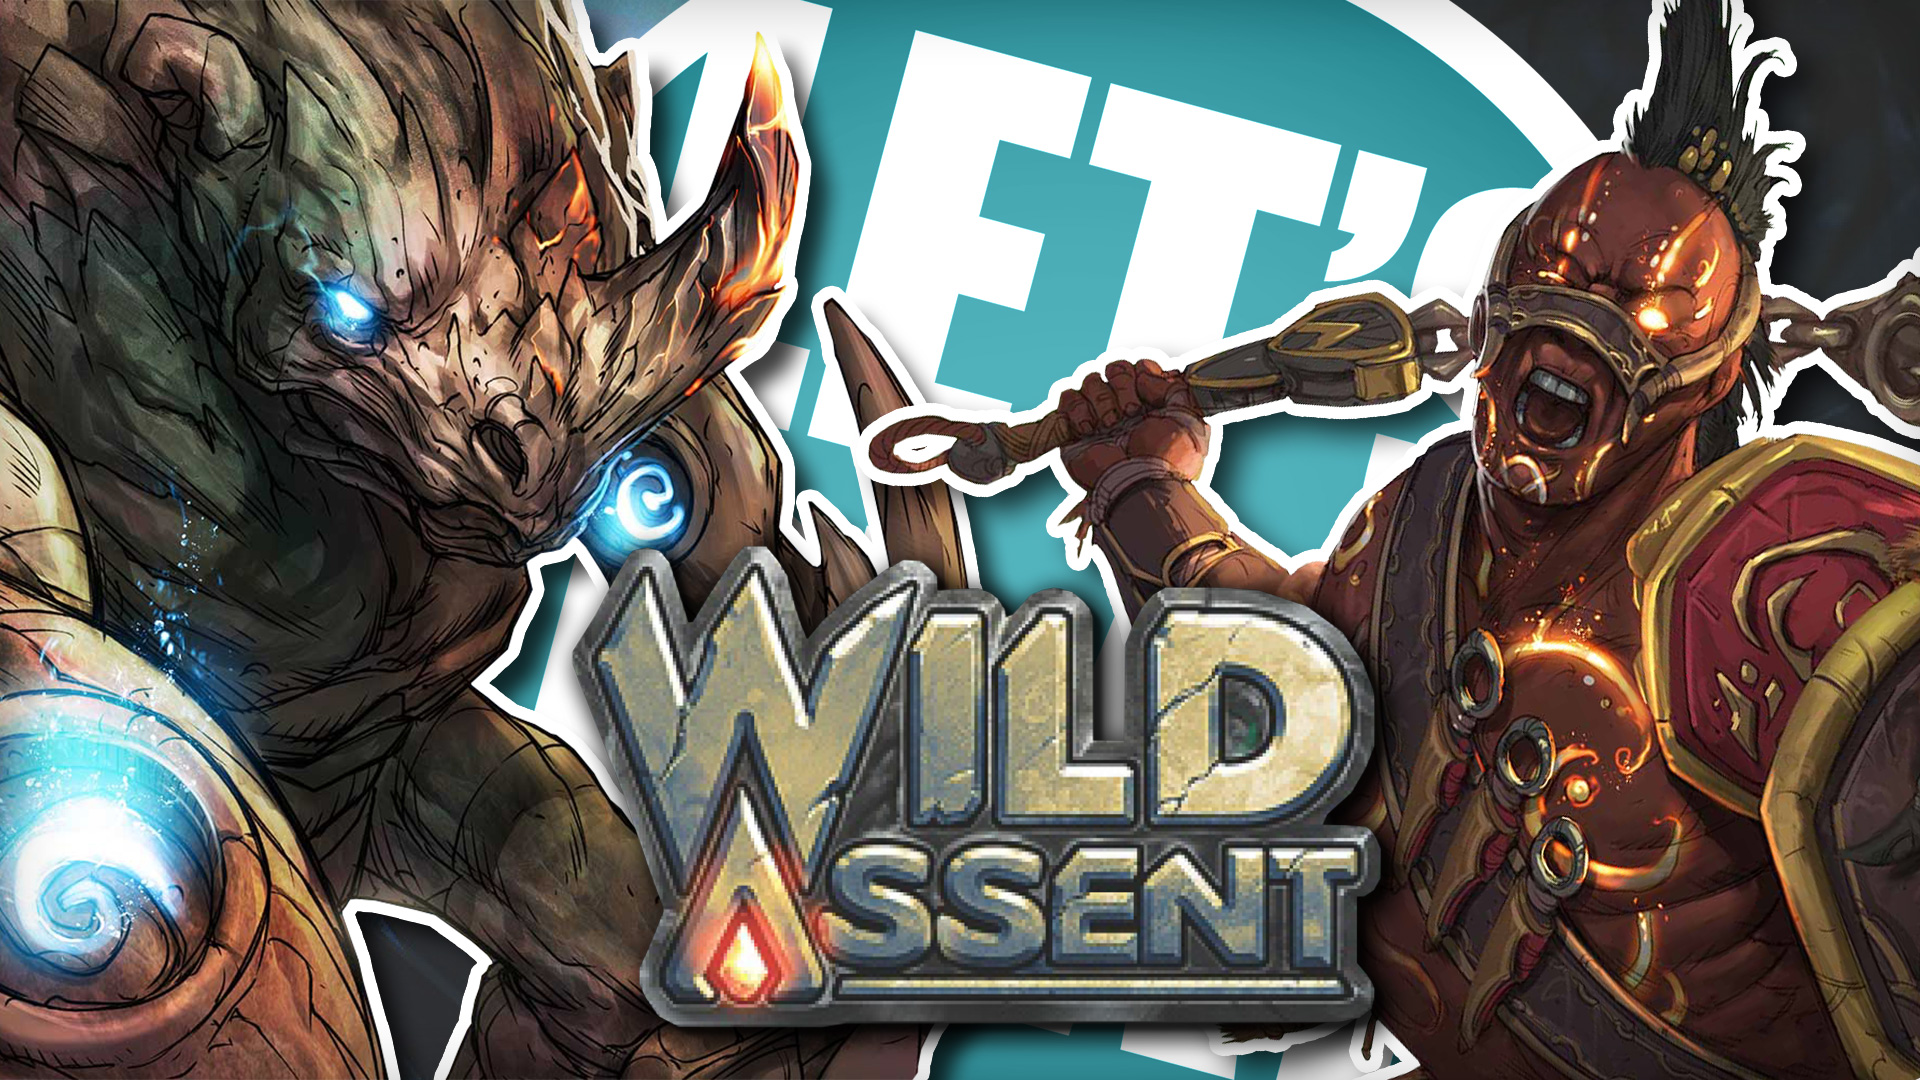 Let's Play - Wild Assent